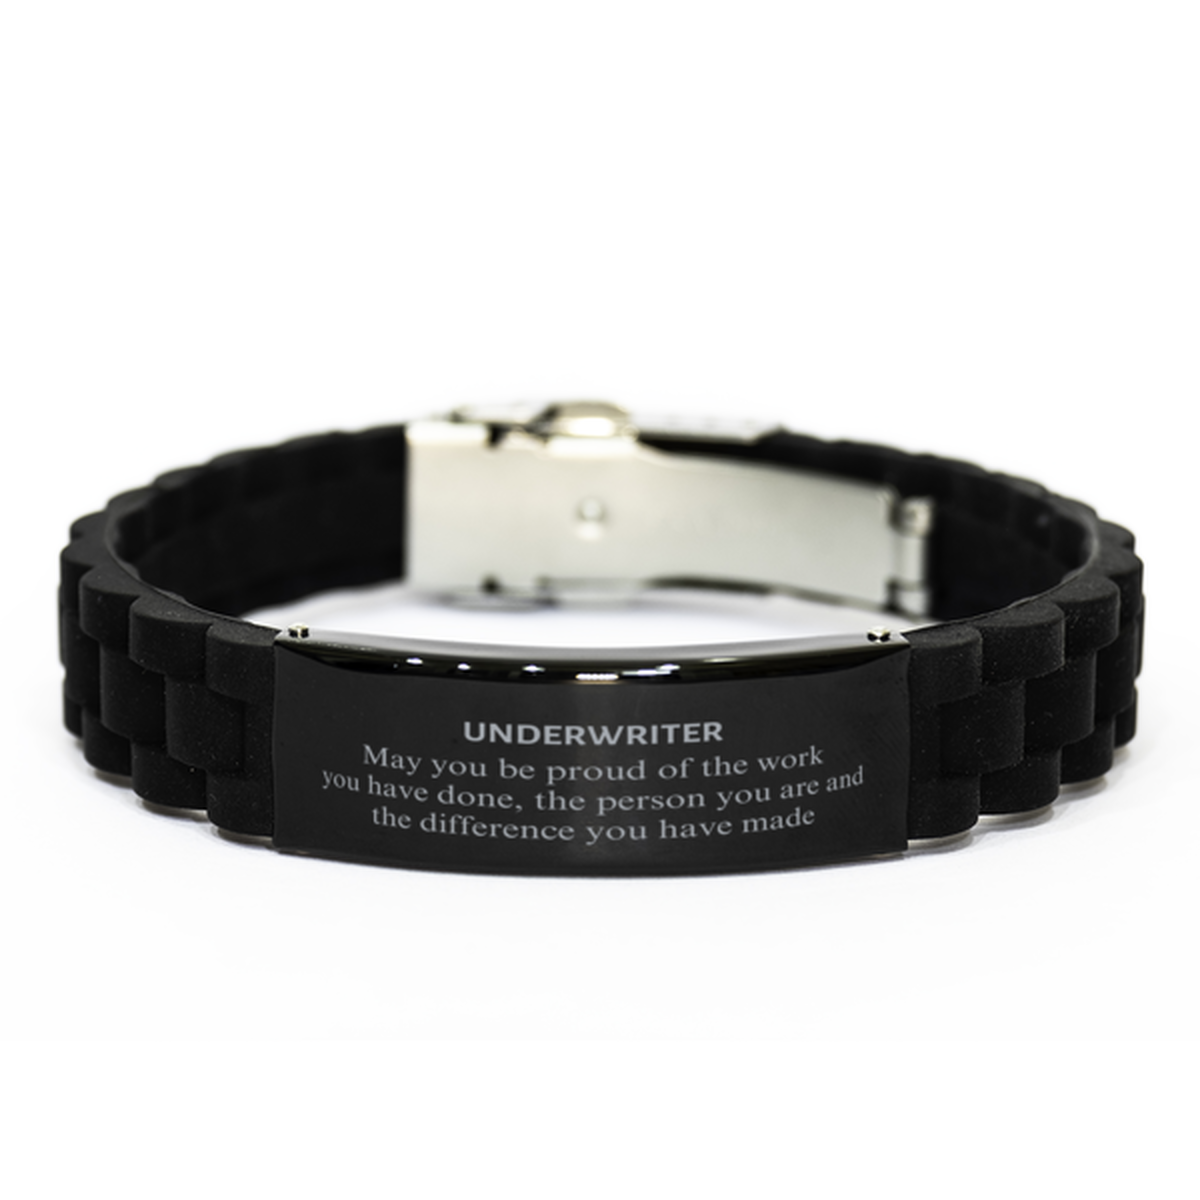 Underwriter May you be proud of the work you have done, Retirement Underwriter Black Glidelock Clasp Bracelet for Colleague Appreciation Gifts Amazing for Underwriter